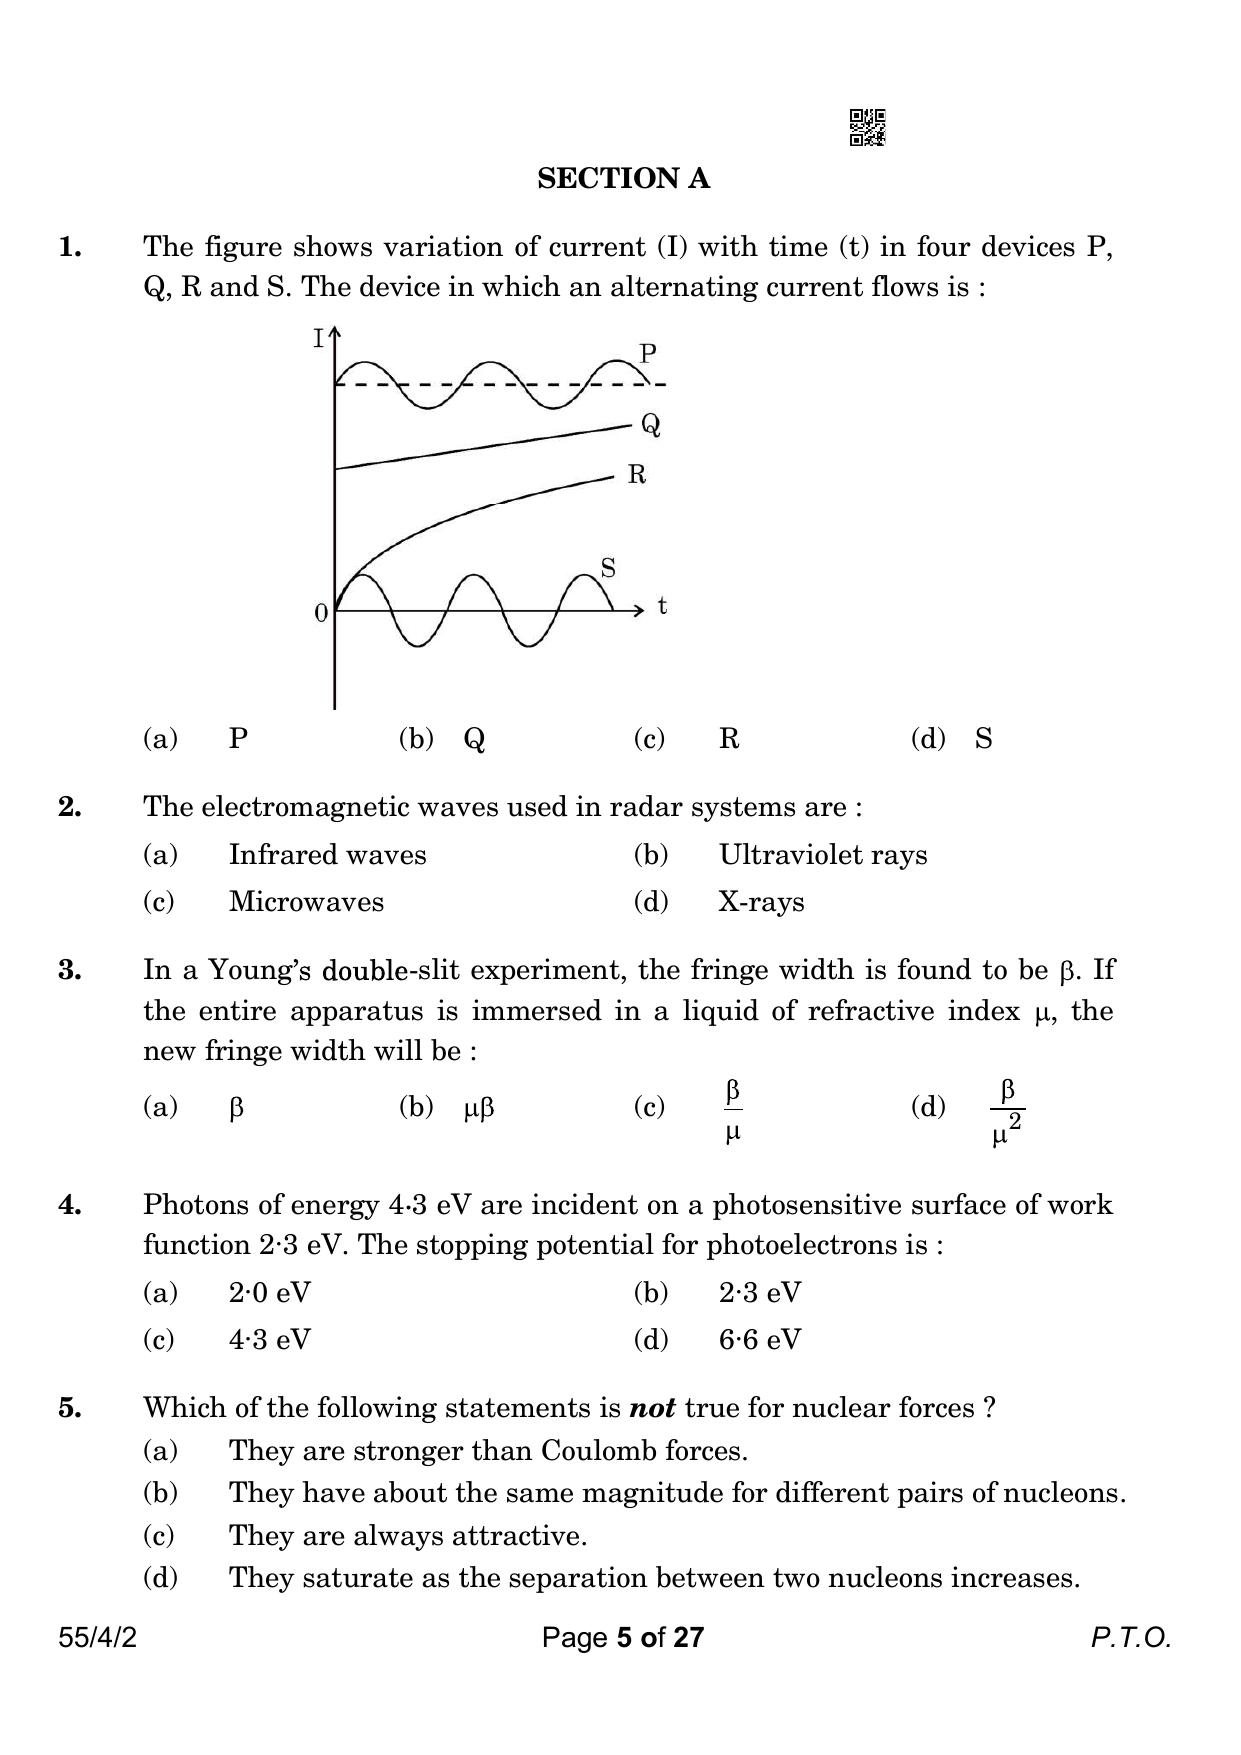 CBSE Class 12 55-4-2 Physics 2023 Question Paper - Page 5